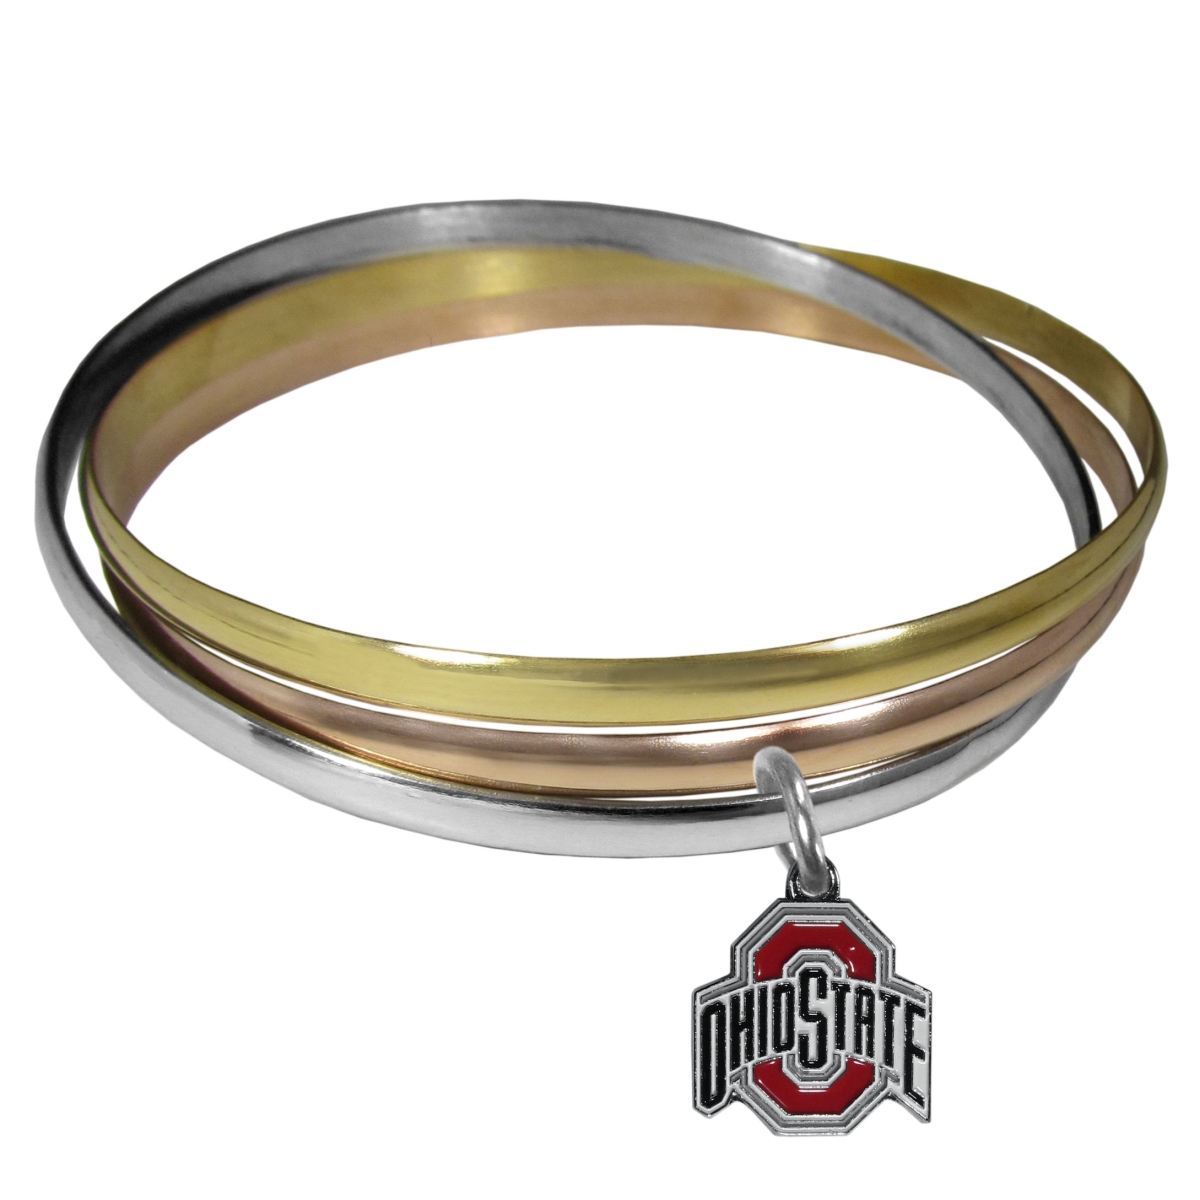 Picture of Siskiyou CBTB38 Female NCAA Ohio State Buckeyes Tri-color Bangle Bracelet - One Size